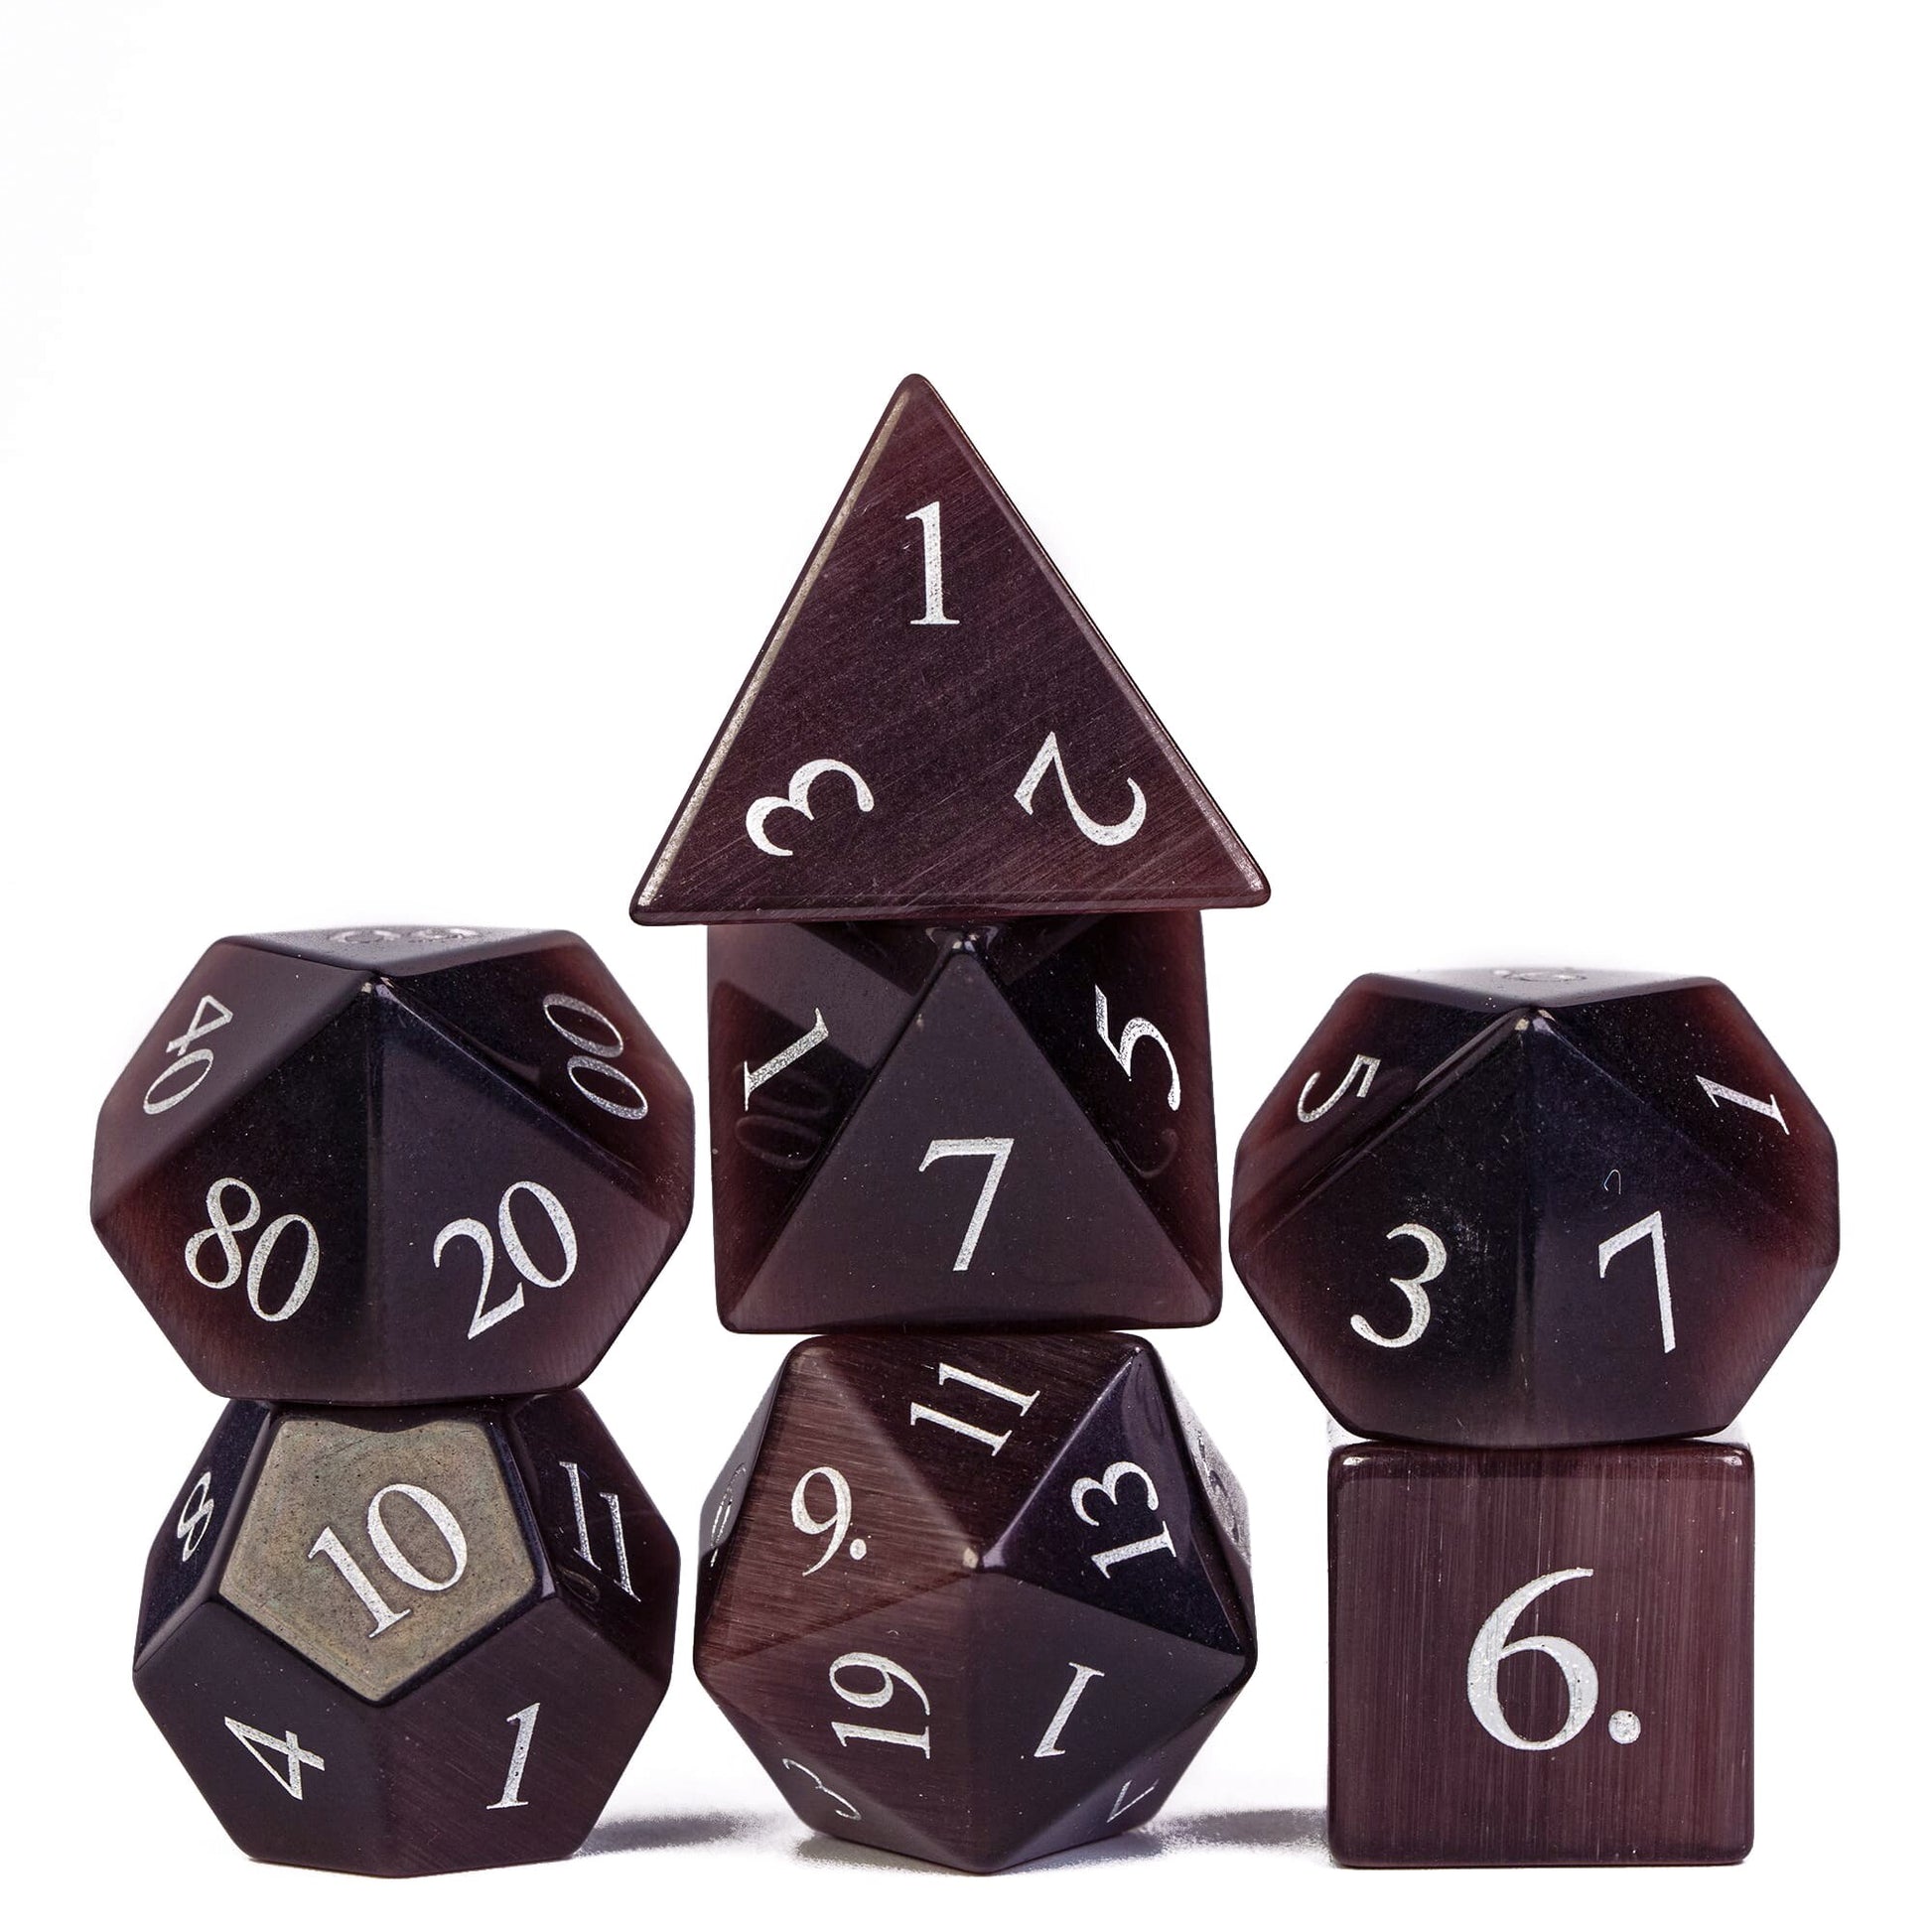 Maroon stone dice set with white background